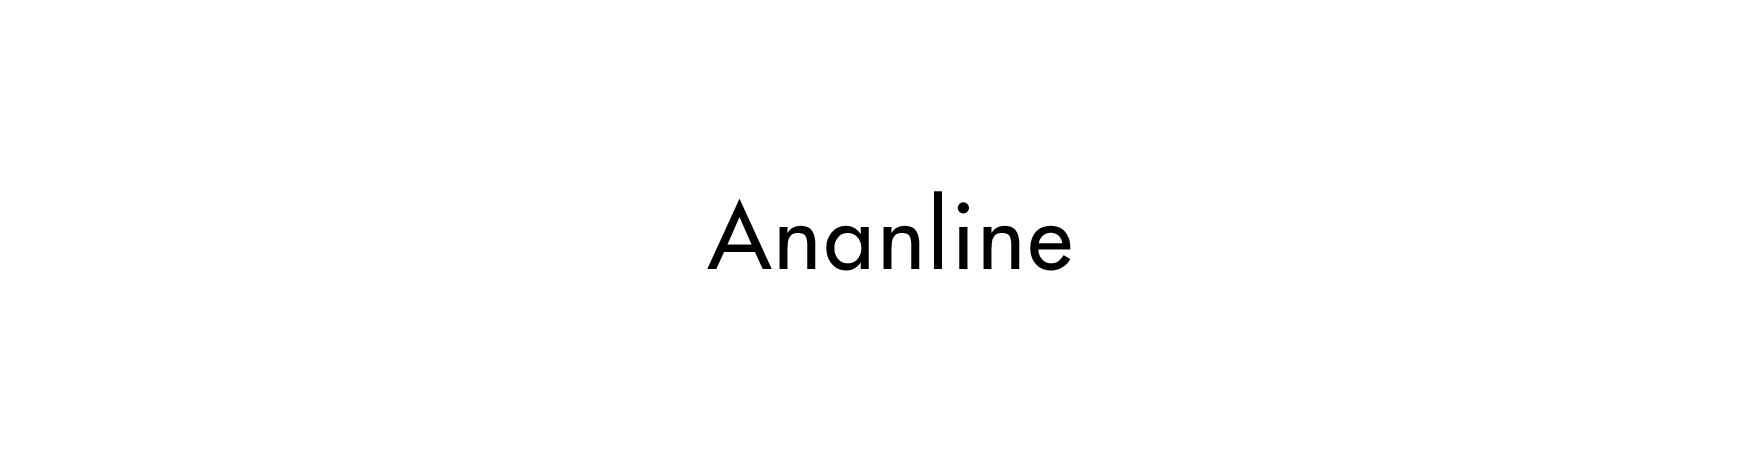 Ananline